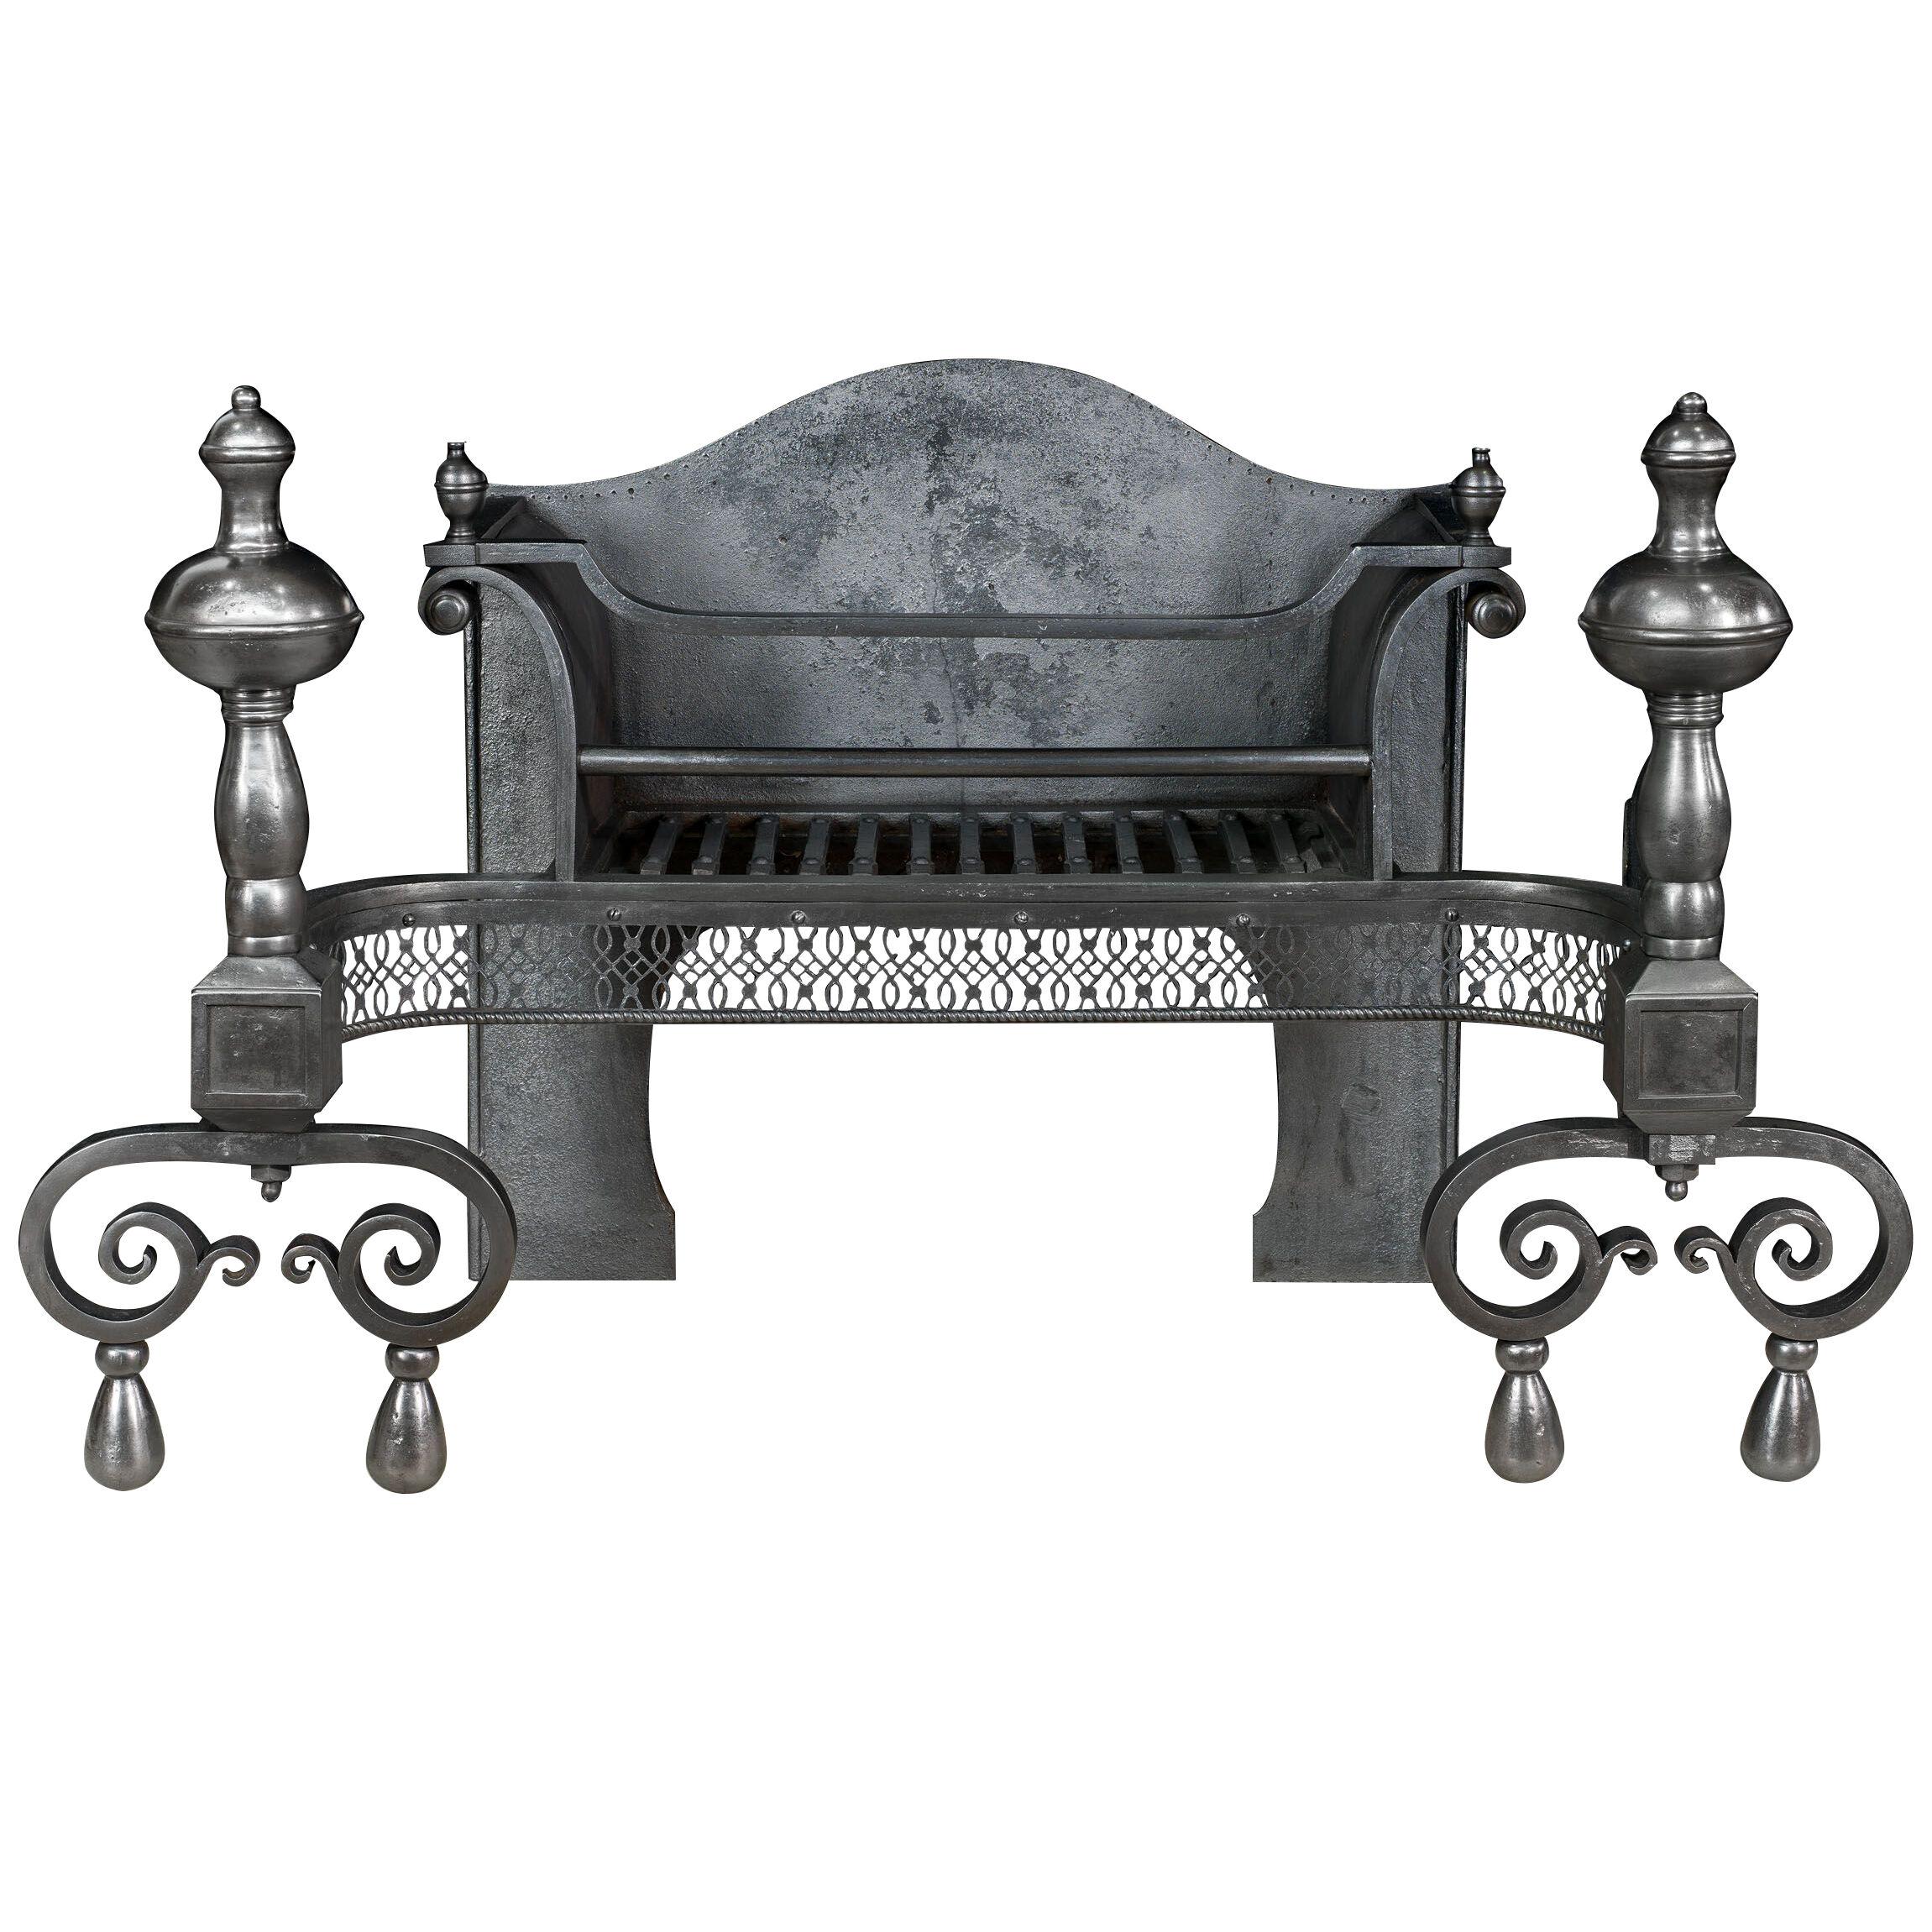 A Victorian steel and cast iron fire basket